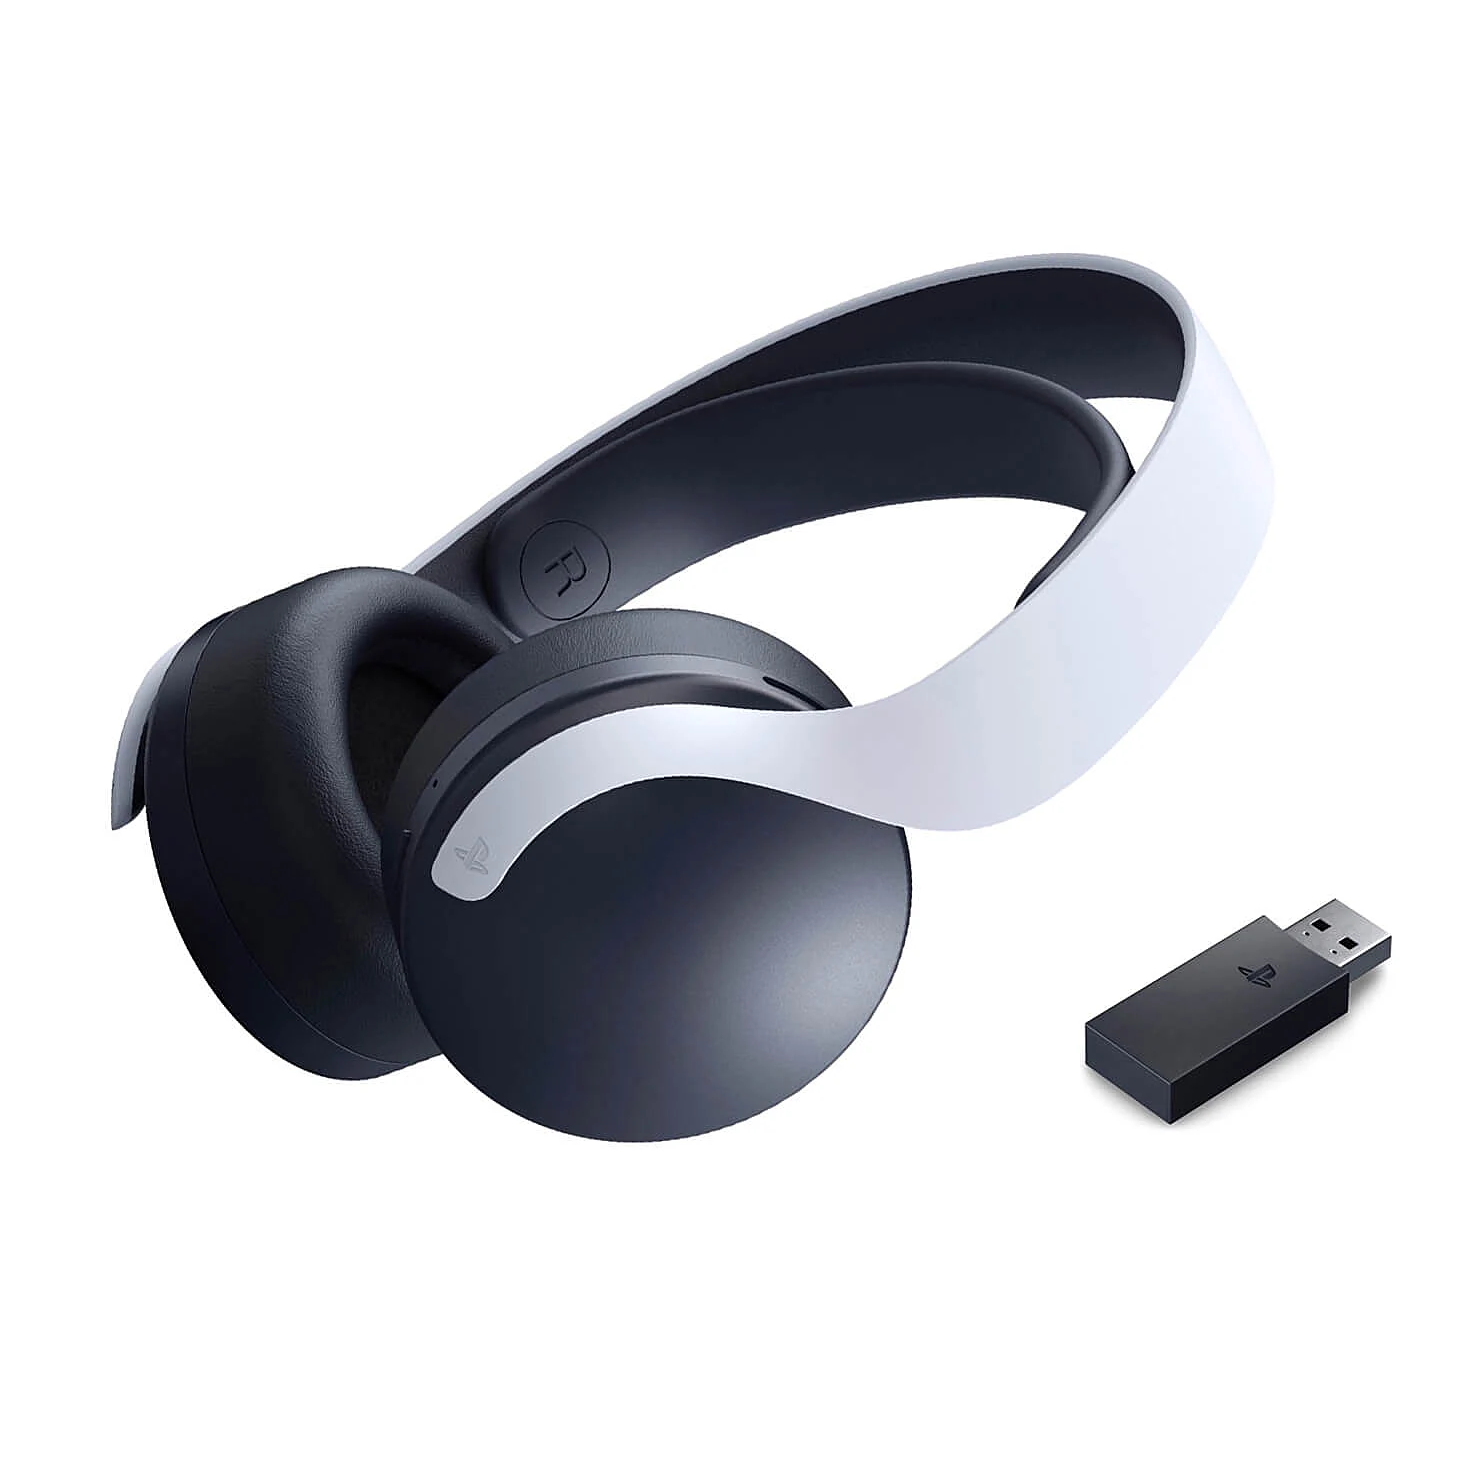 Sony Pulse 3D Wireless Gaming Headset - White - New